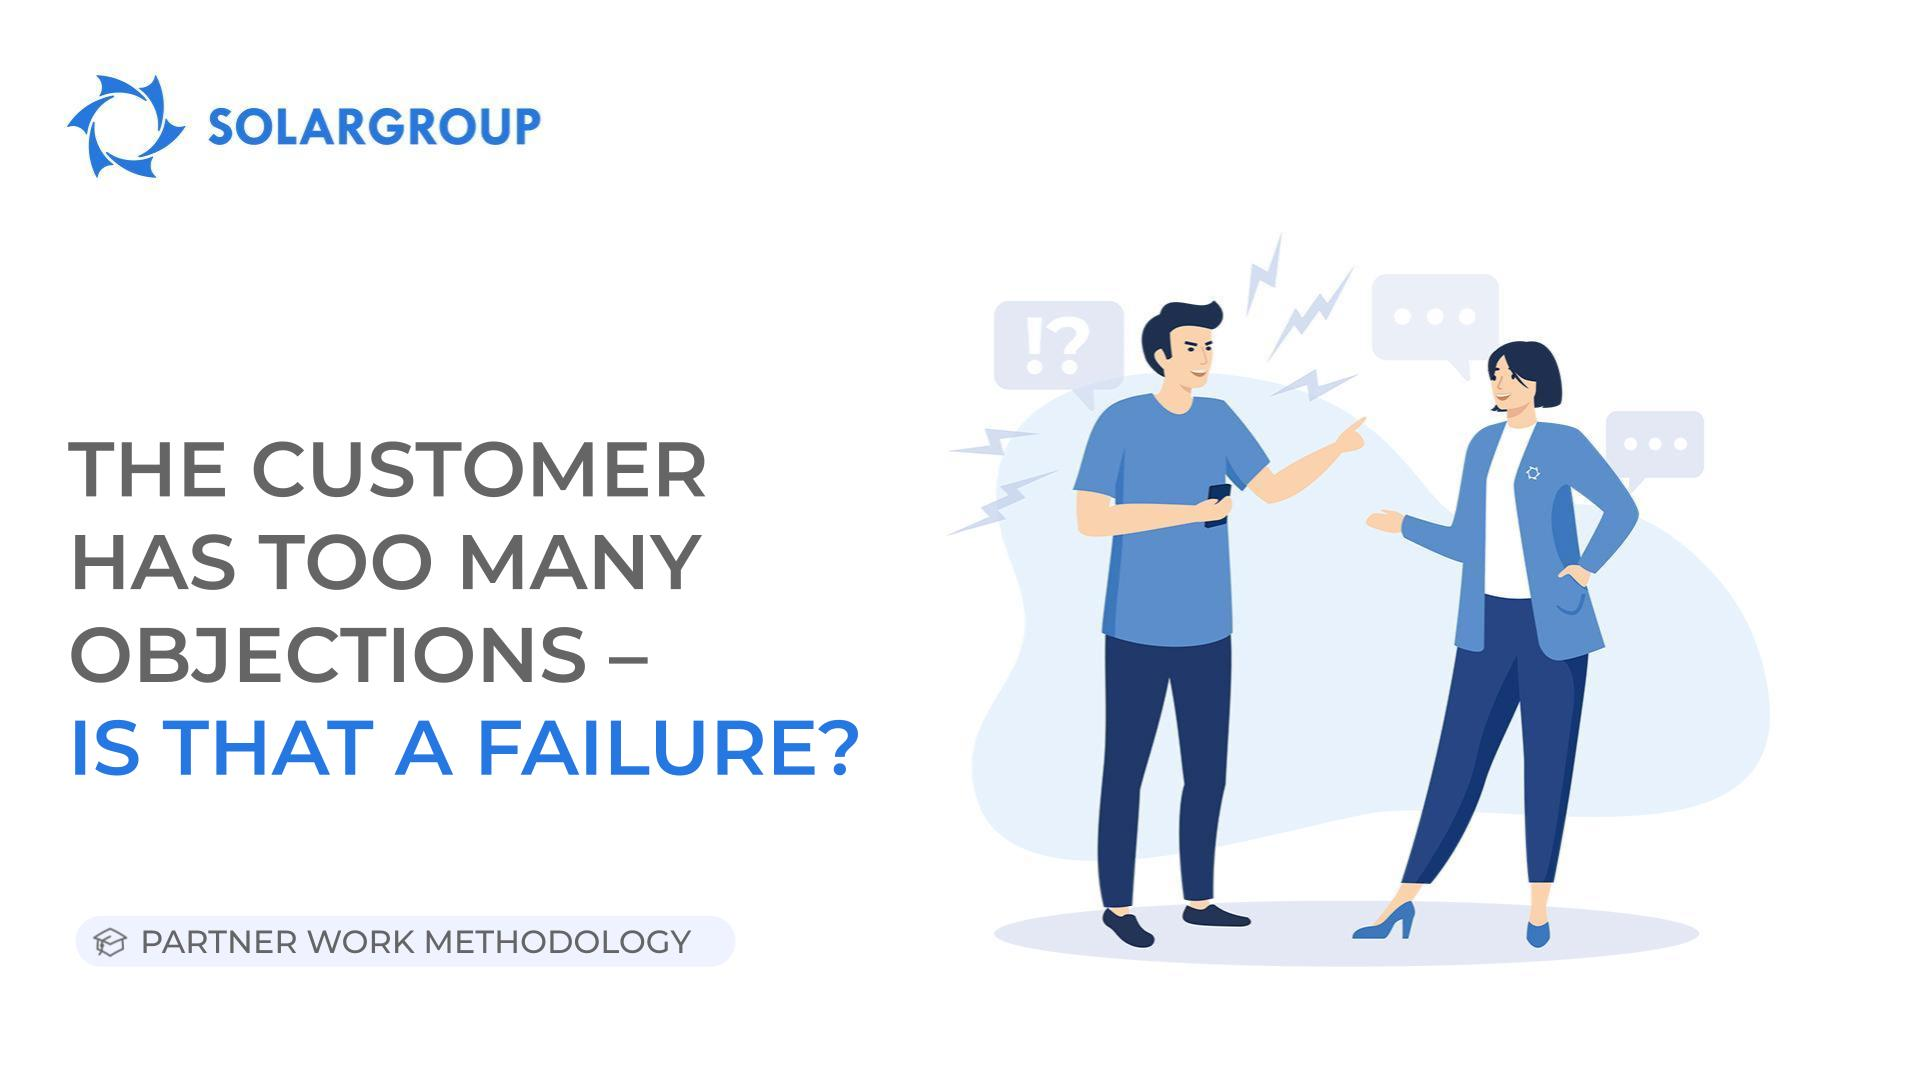 The customer has too many objections - is that a failure?